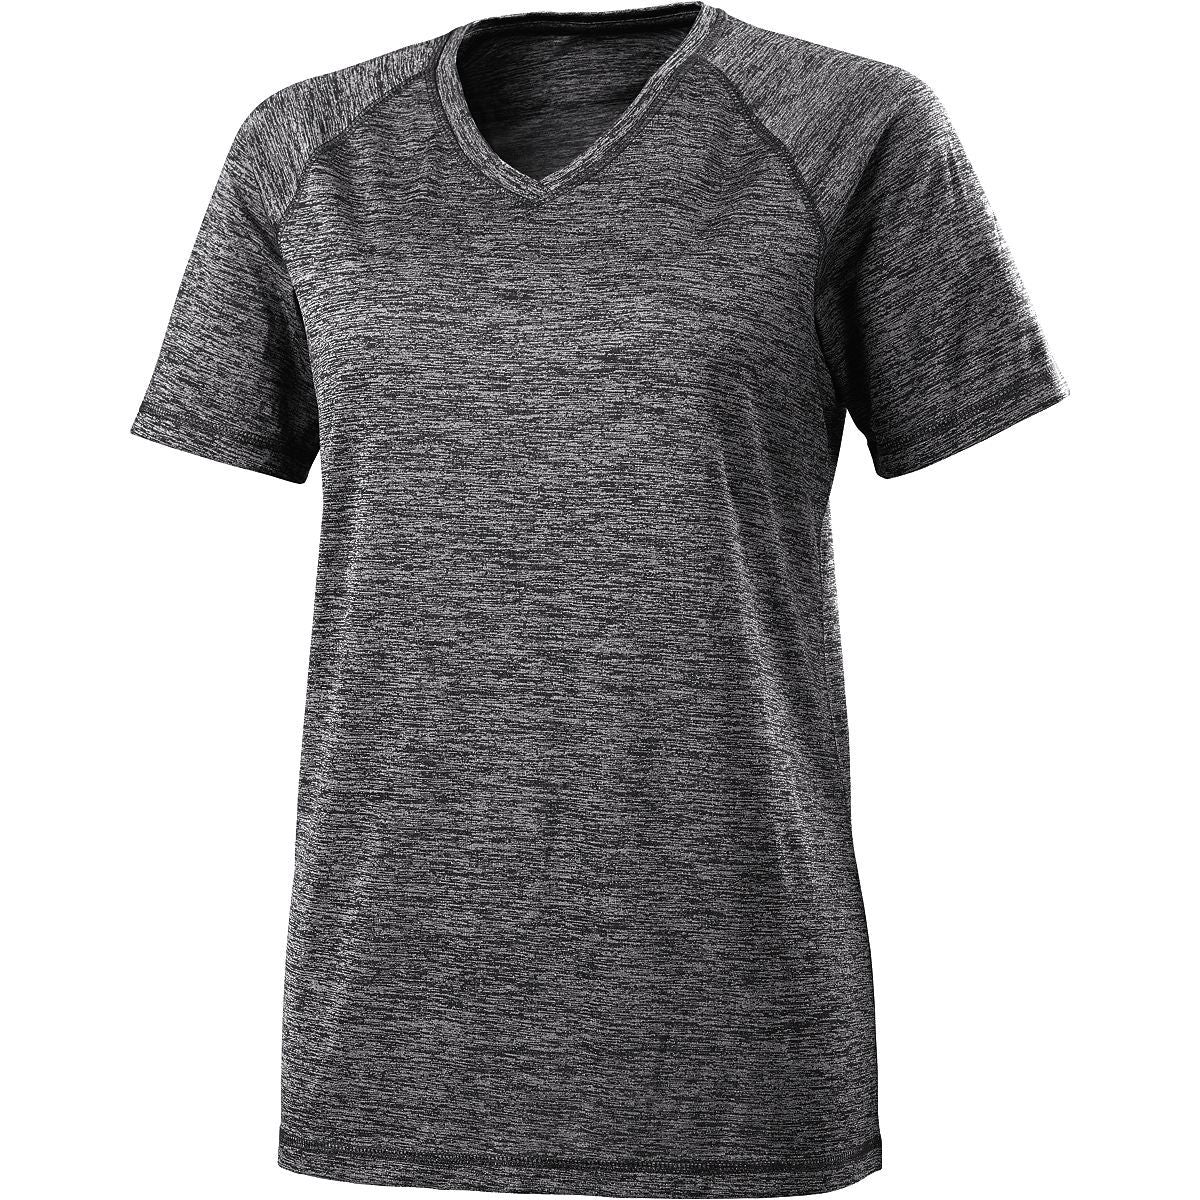 Holloway Ladies Electrify 2.0  Short Sleeve Shirt V-Neck in Black Heather  -Part of the Ladies, Holloway, Shirts product lines at KanaleyCreations.com